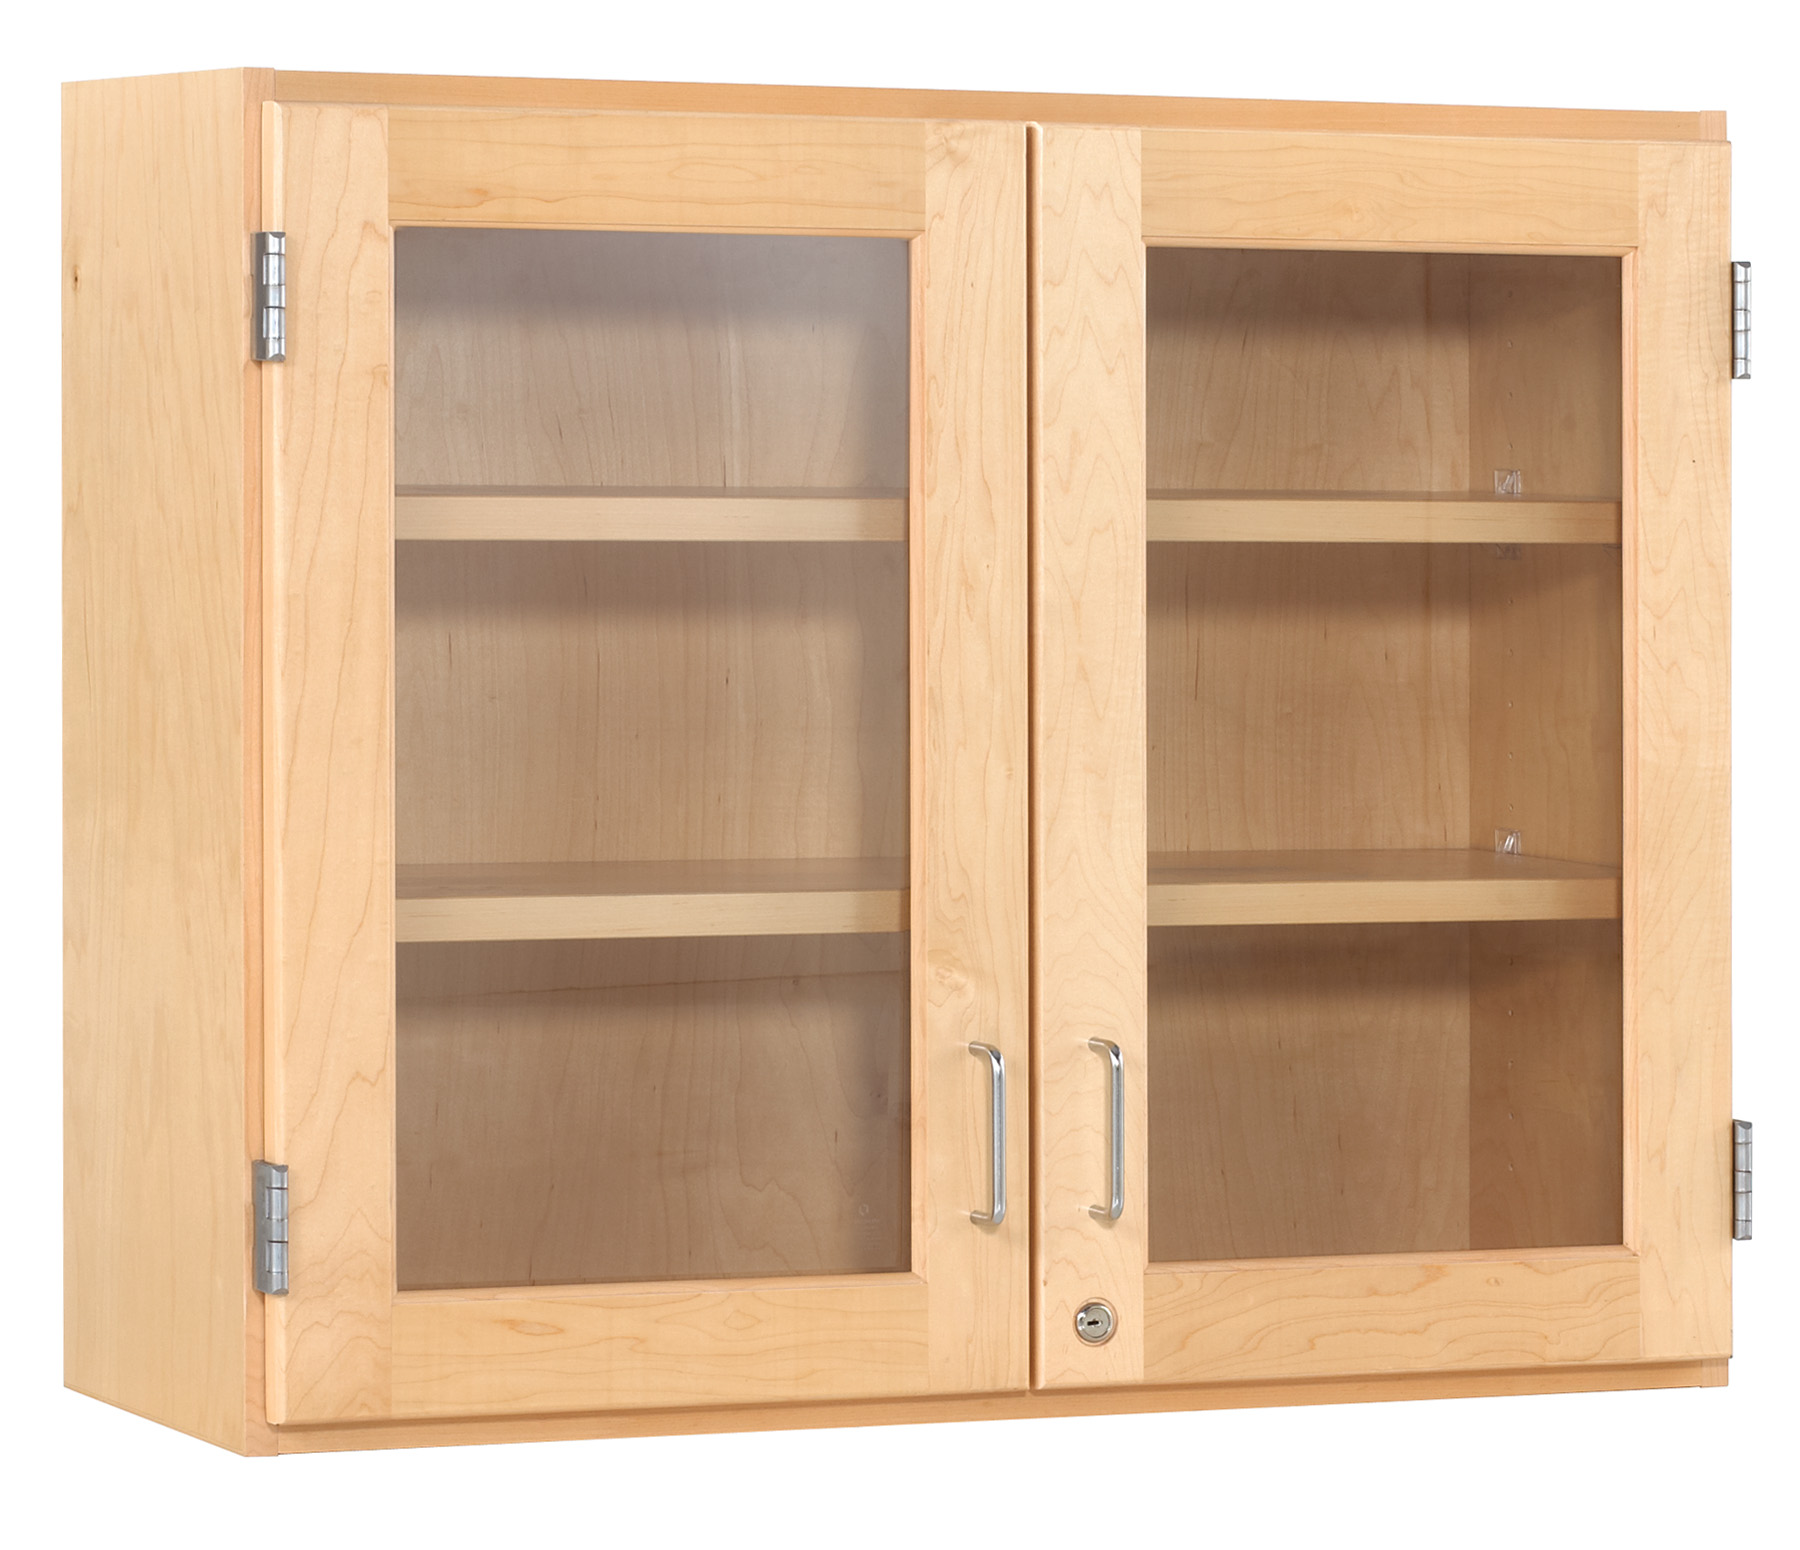 Wall Storage Cabinet 36 W X 30 H 12, 12 Inch Deep Cabinet With Doors